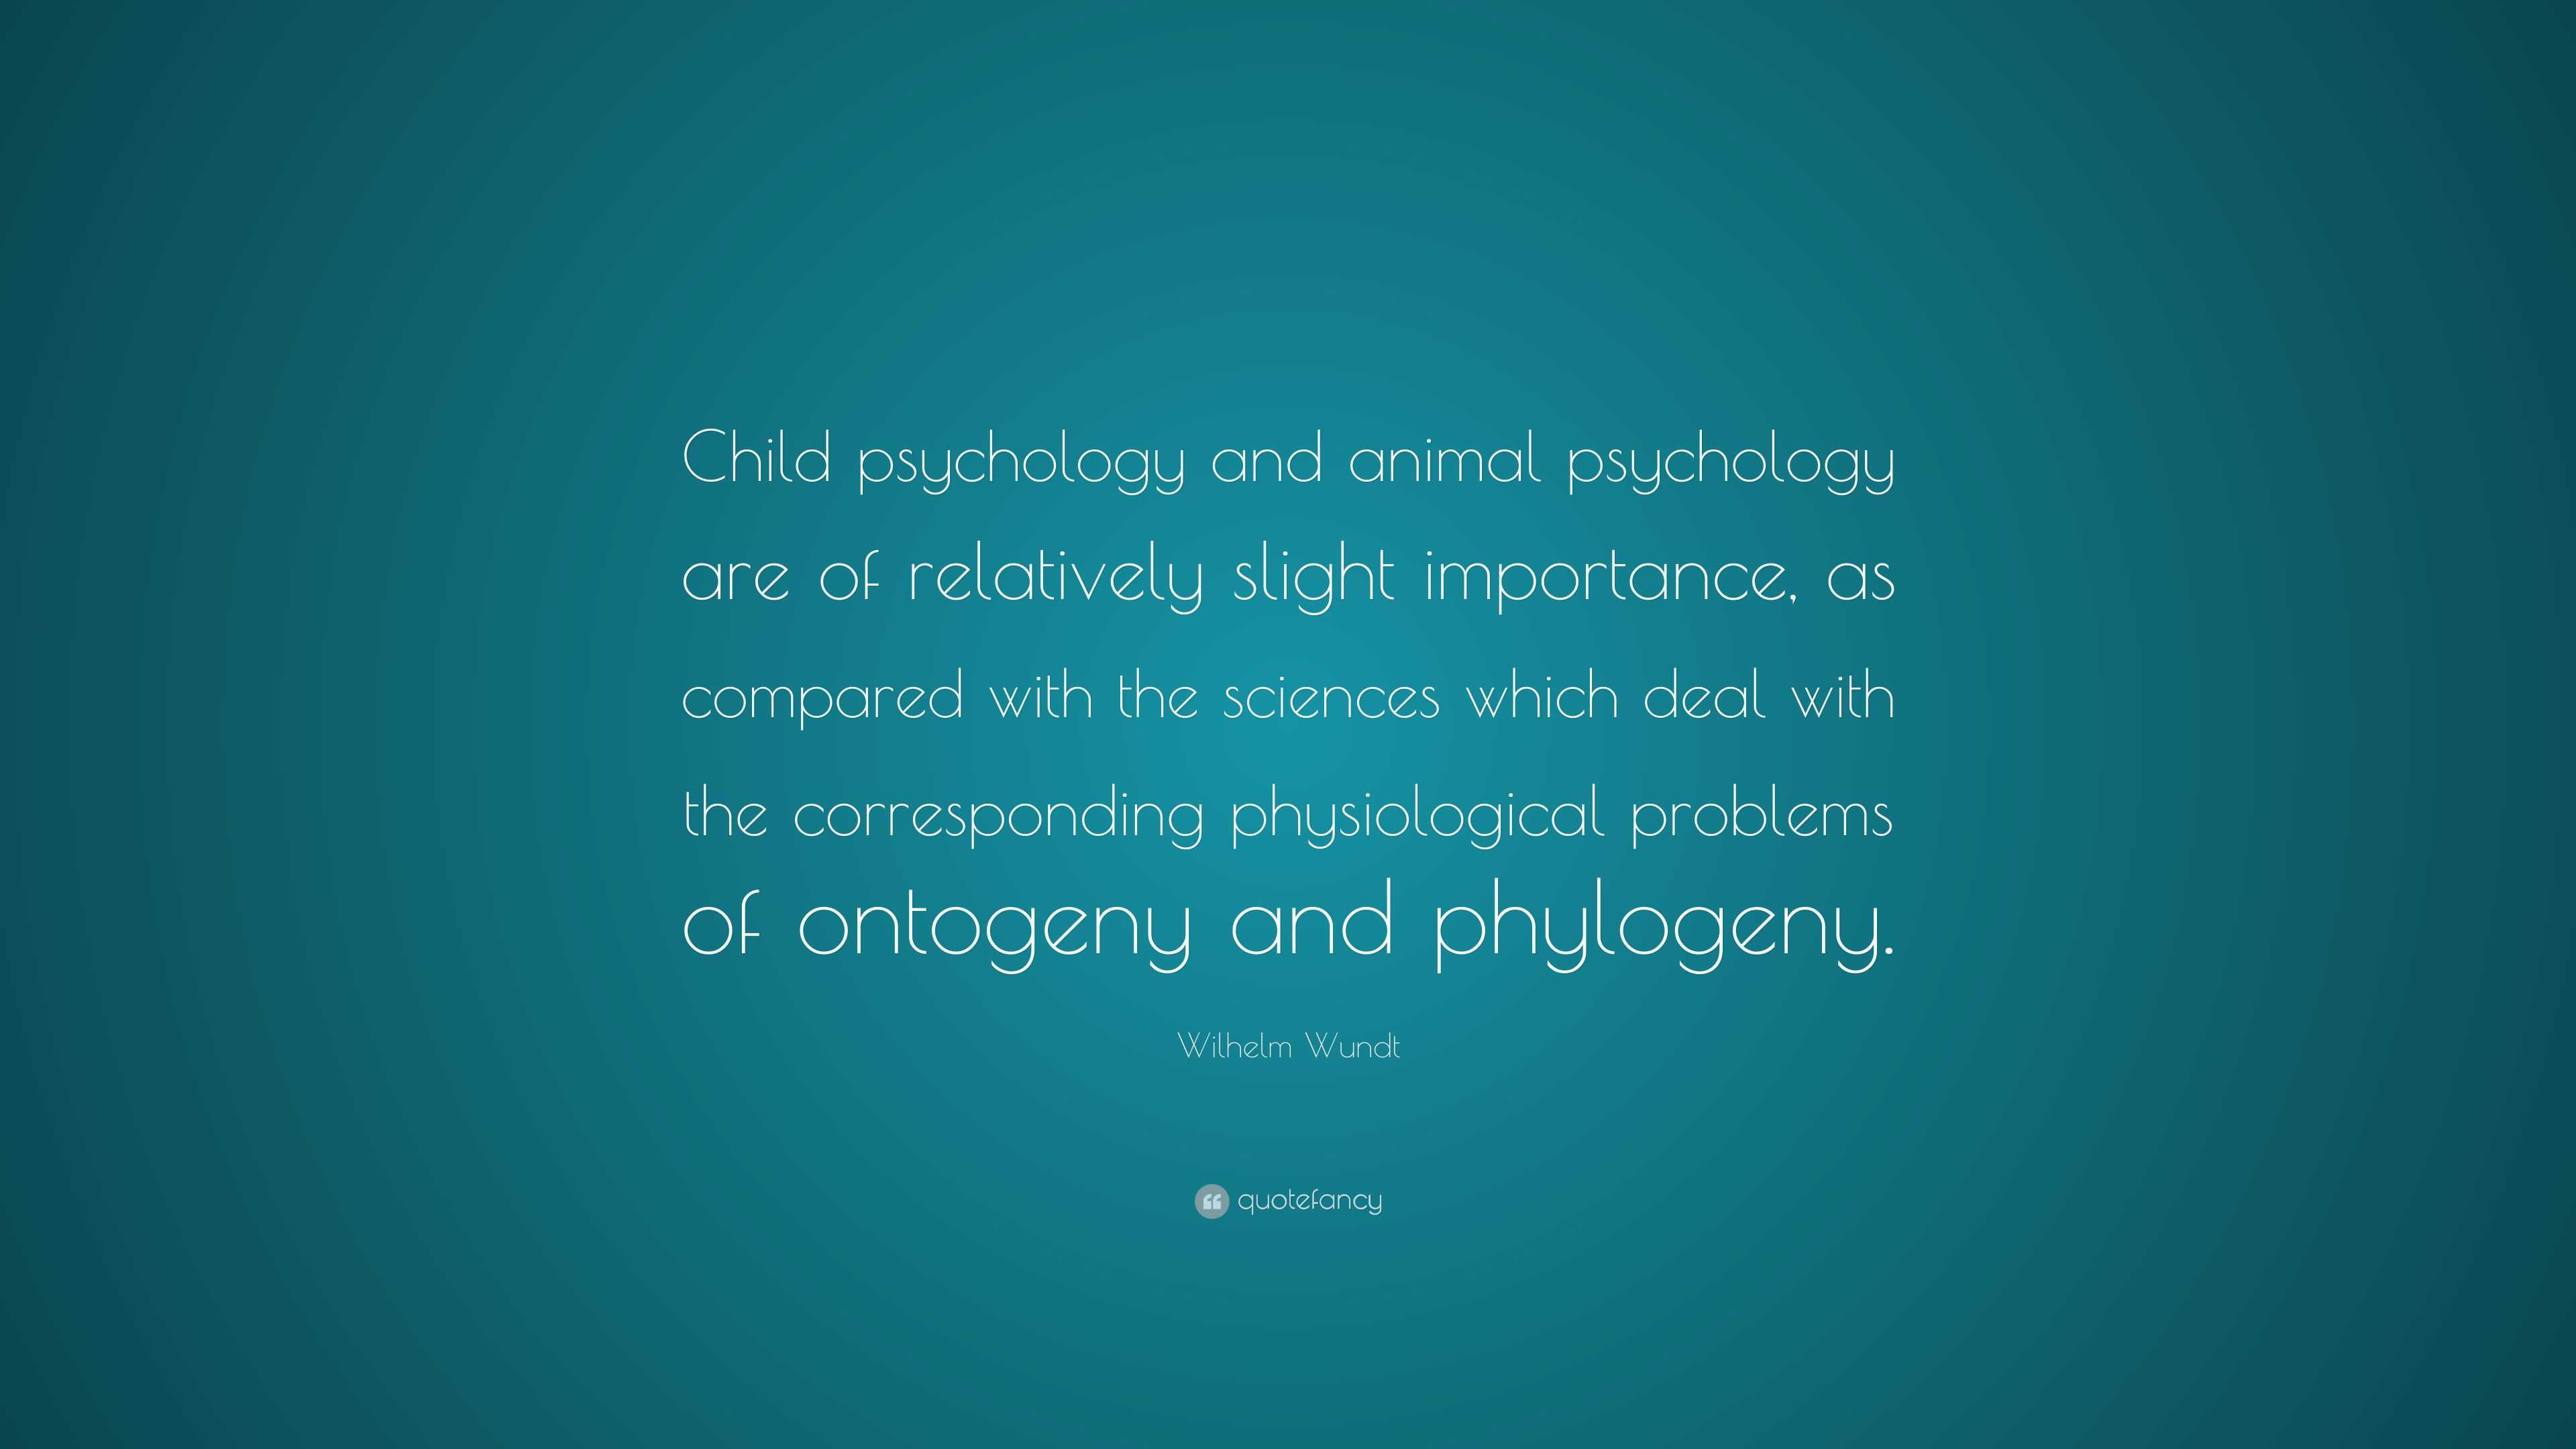 Wilhelm Wundt Quote: “Child psychology and animal psychology are of